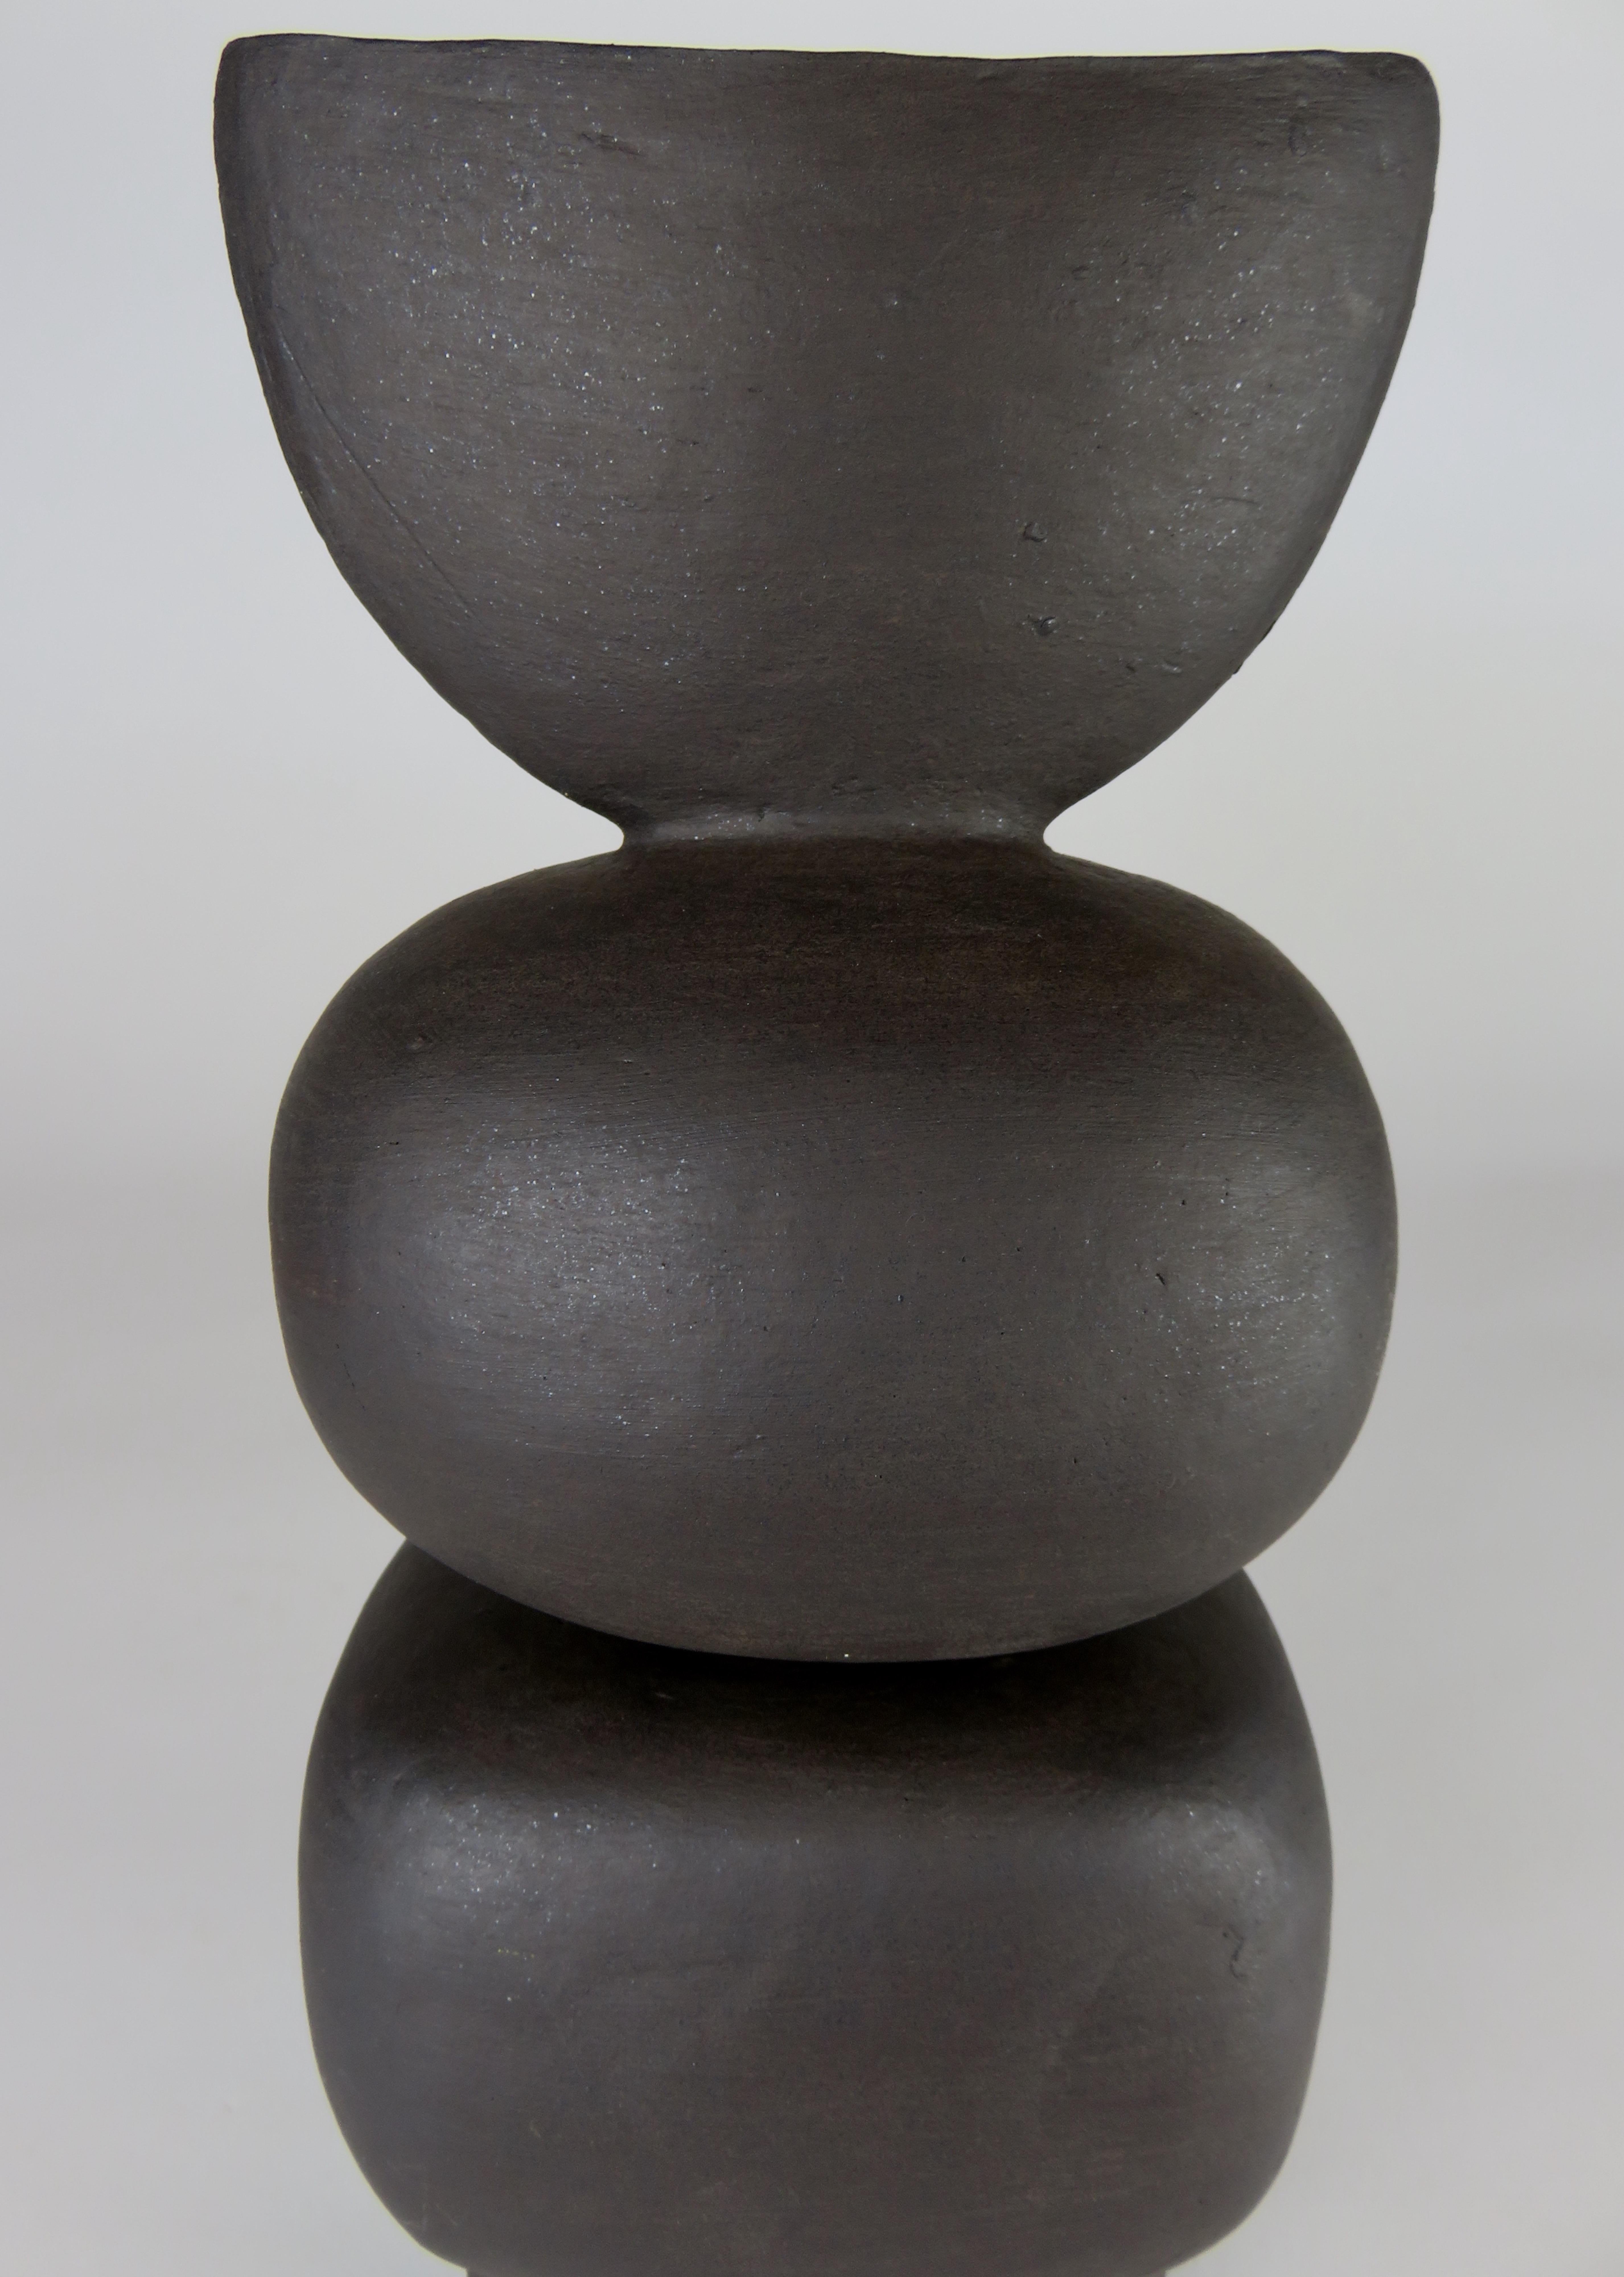 Hand-Crafted Matte Black Ceramic TOTEM, Round and Rectangular Forms, Half Moon Top